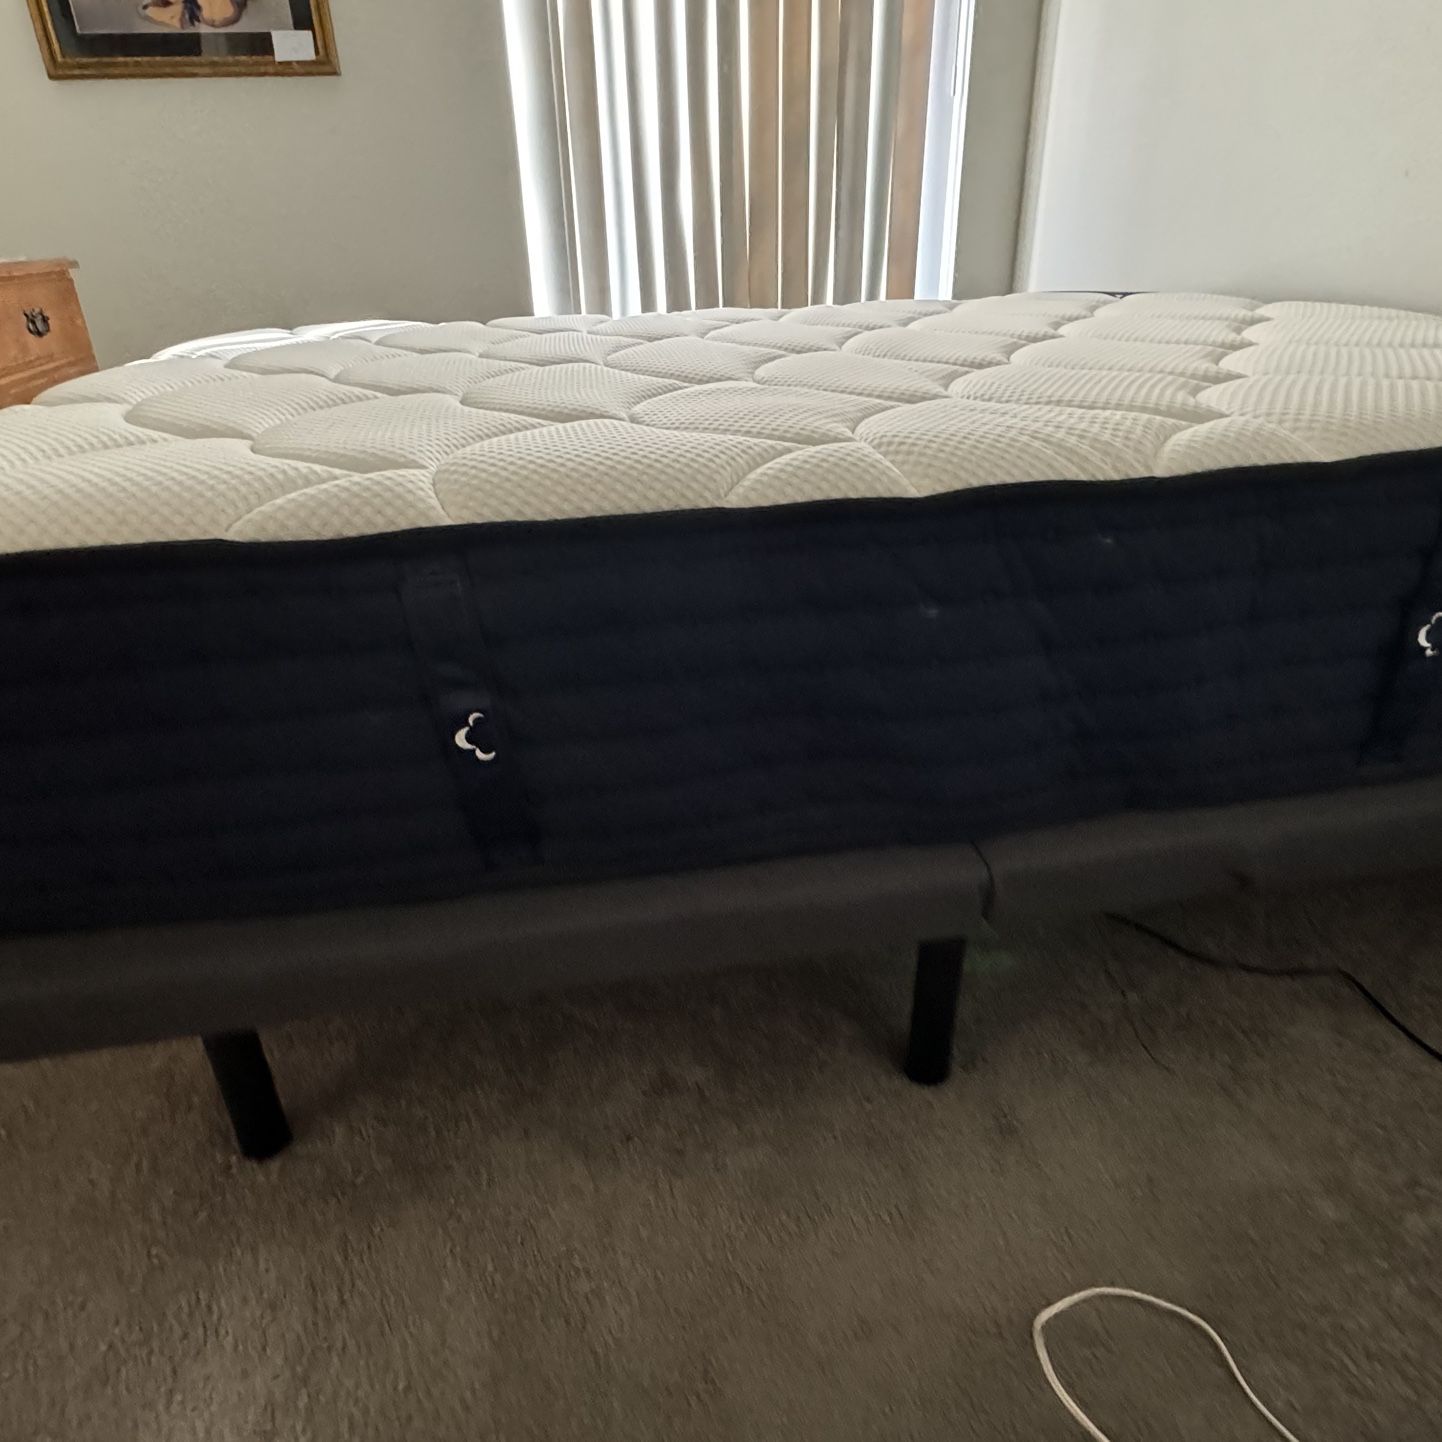 Adjustable Bed Frame with Mattress - FULL $400 or MAKE AN OFFER